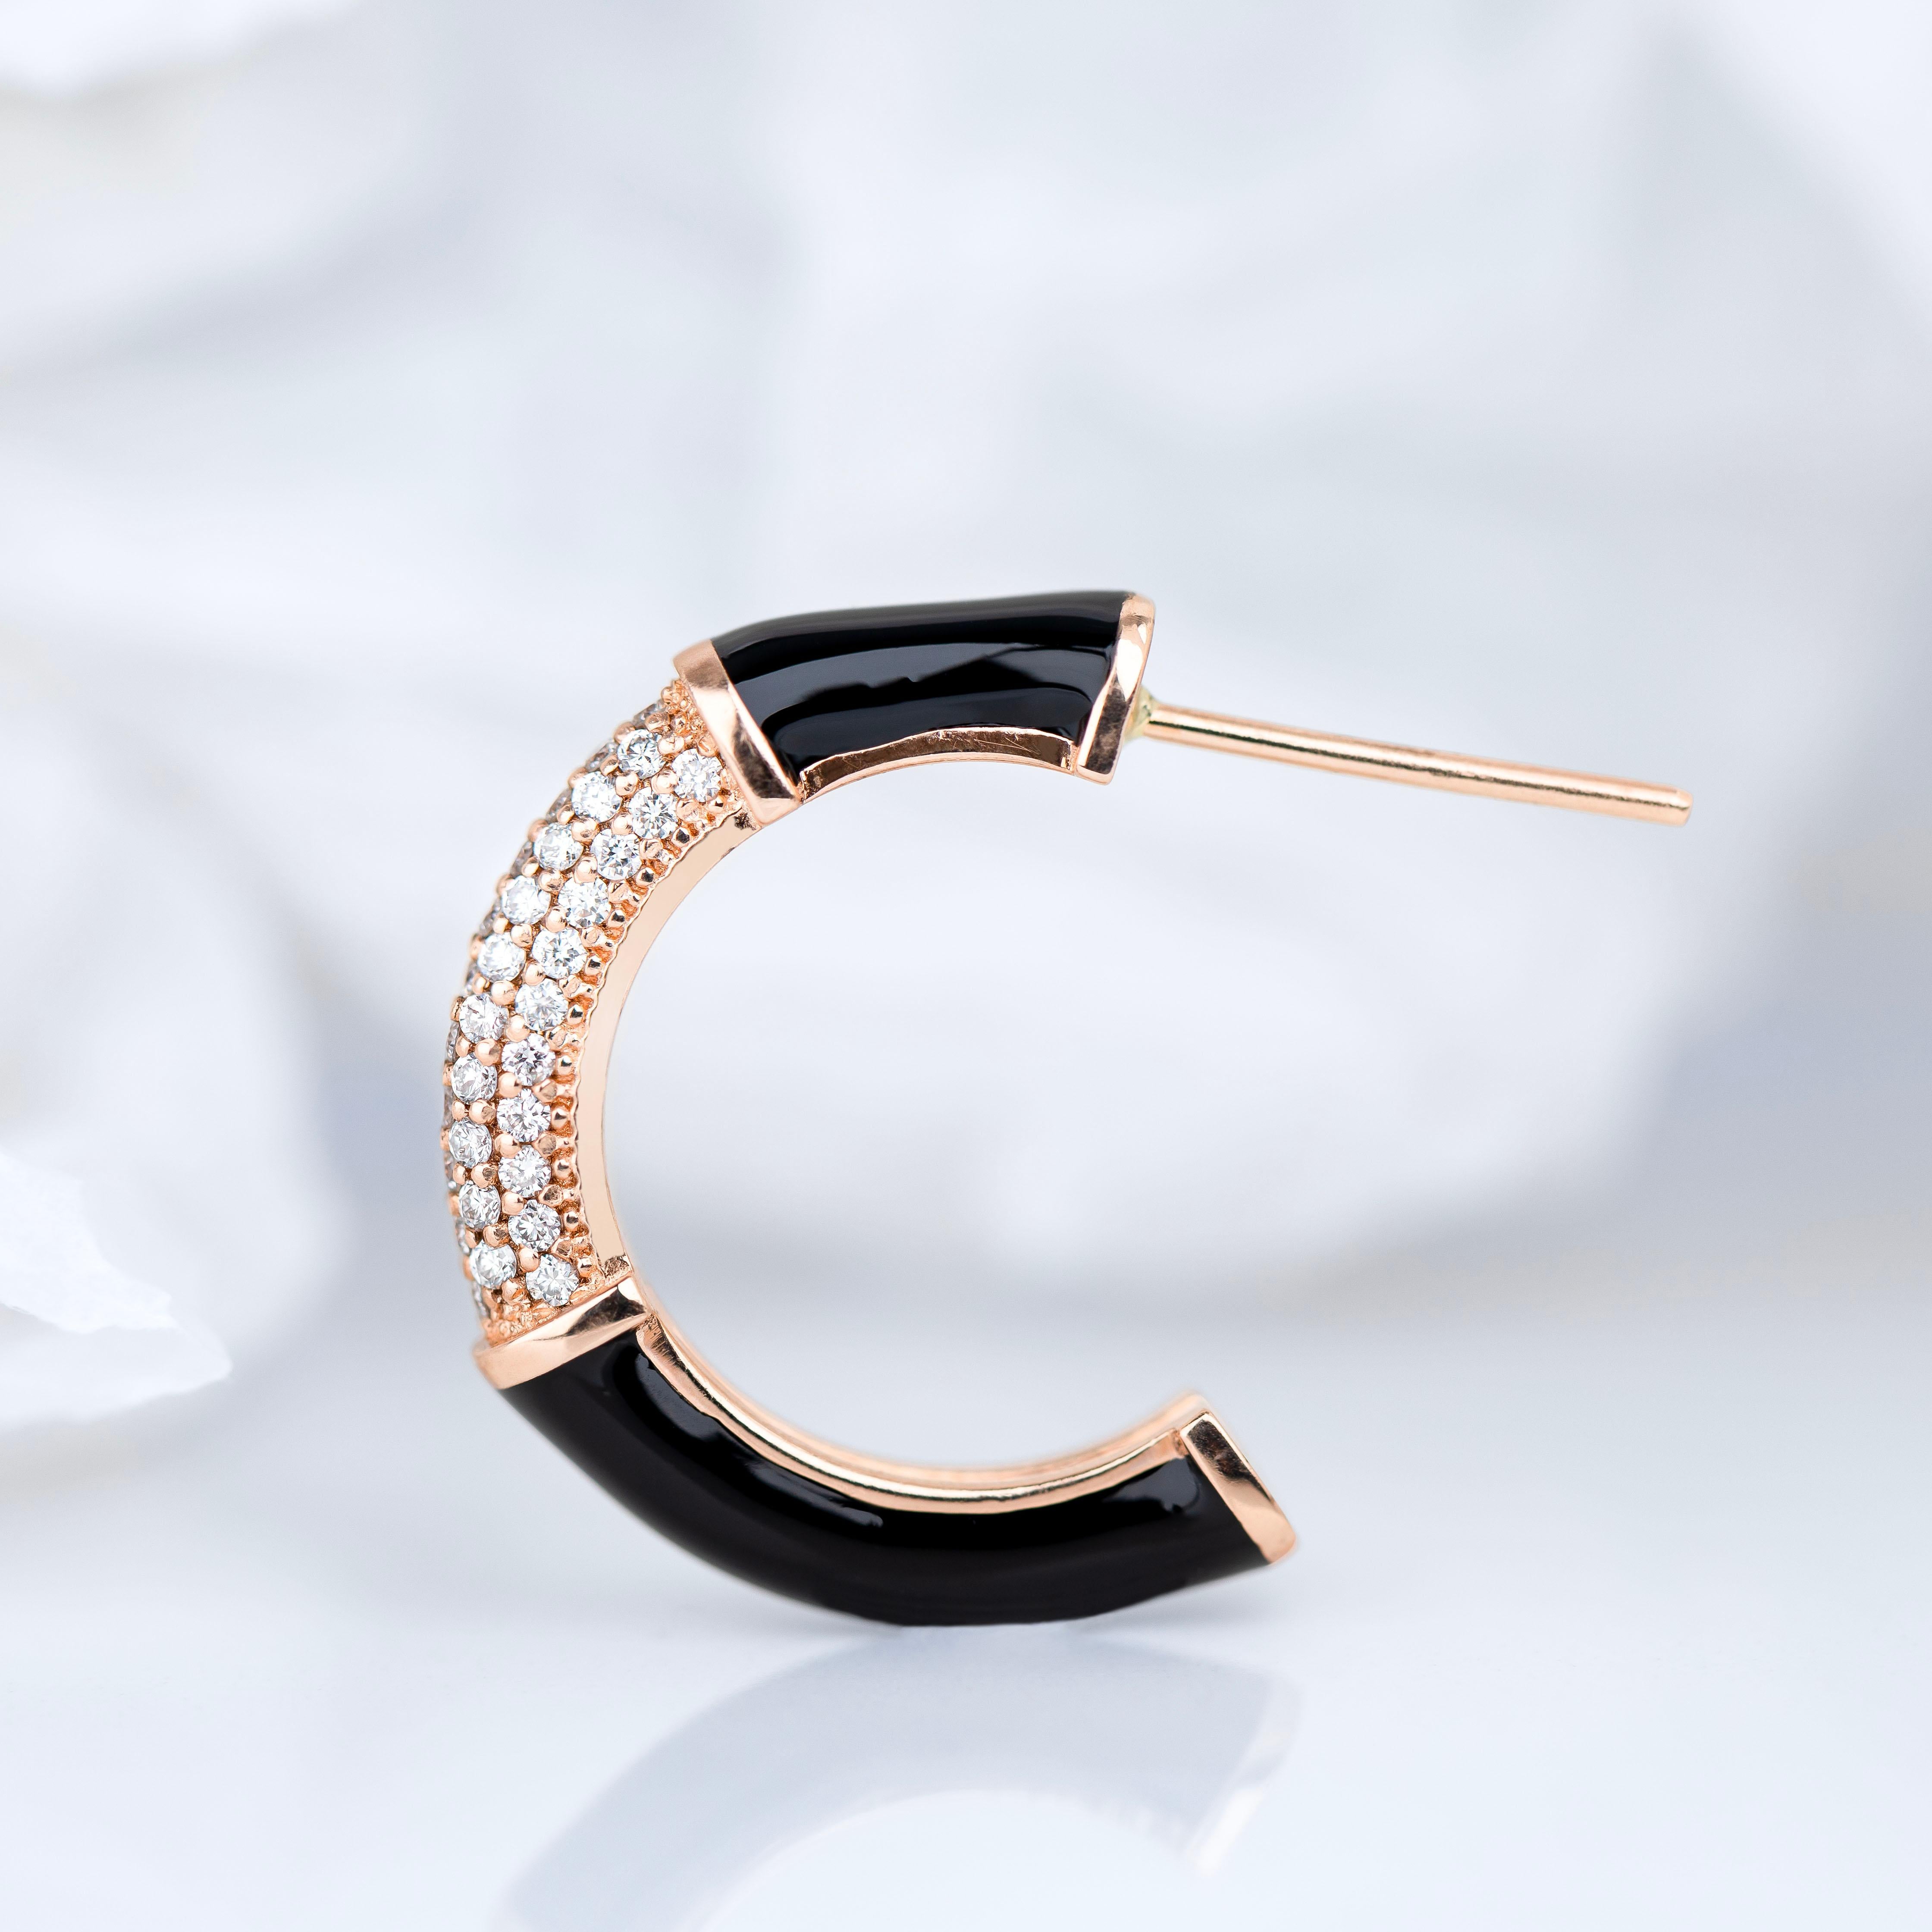 Art Deco Style Gold Earring with Diamond Stone, Bumble Colors Earring

This ring was made with quality materials and excellent handwork. I guarantee the quality assurance of my handwork and materials. It is vital for me that you are totally happy